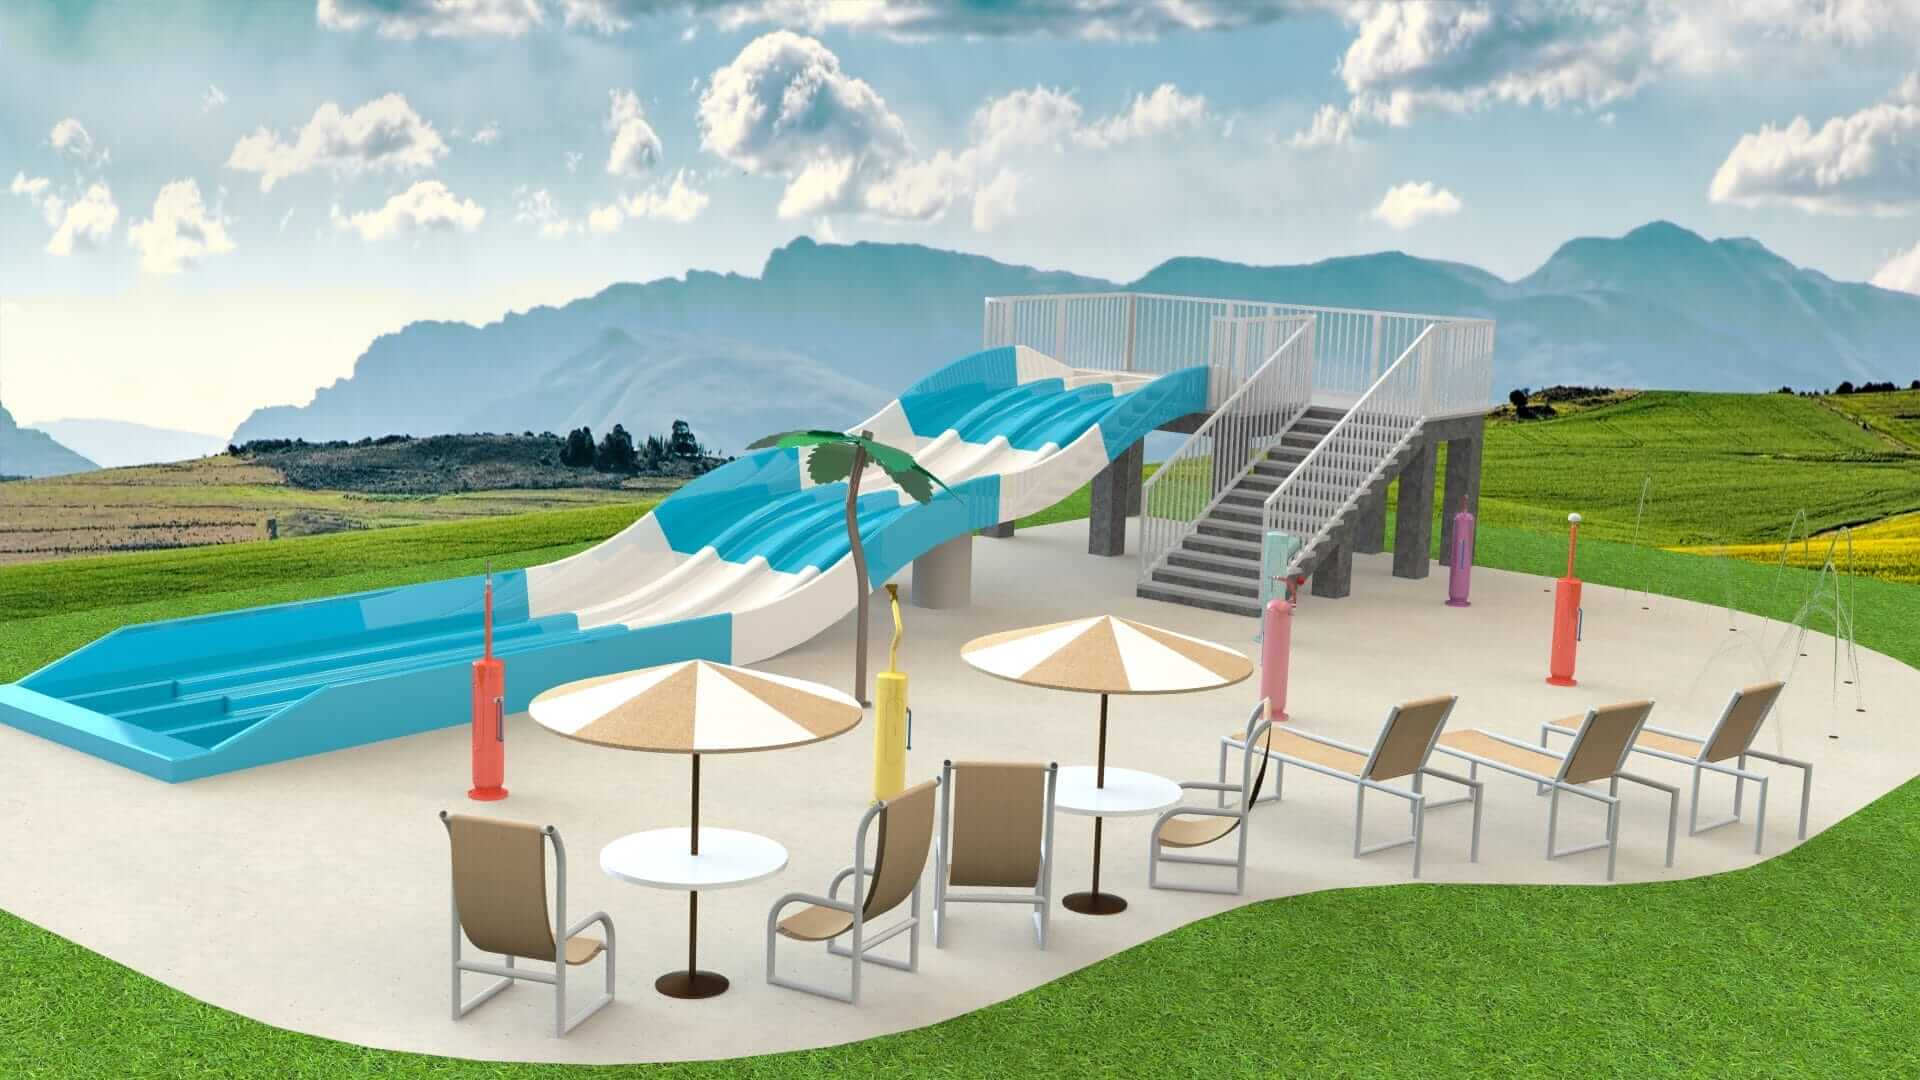 3D rendering of a splash pad concept design by Interactive Play, shows the section where water slides can be added.